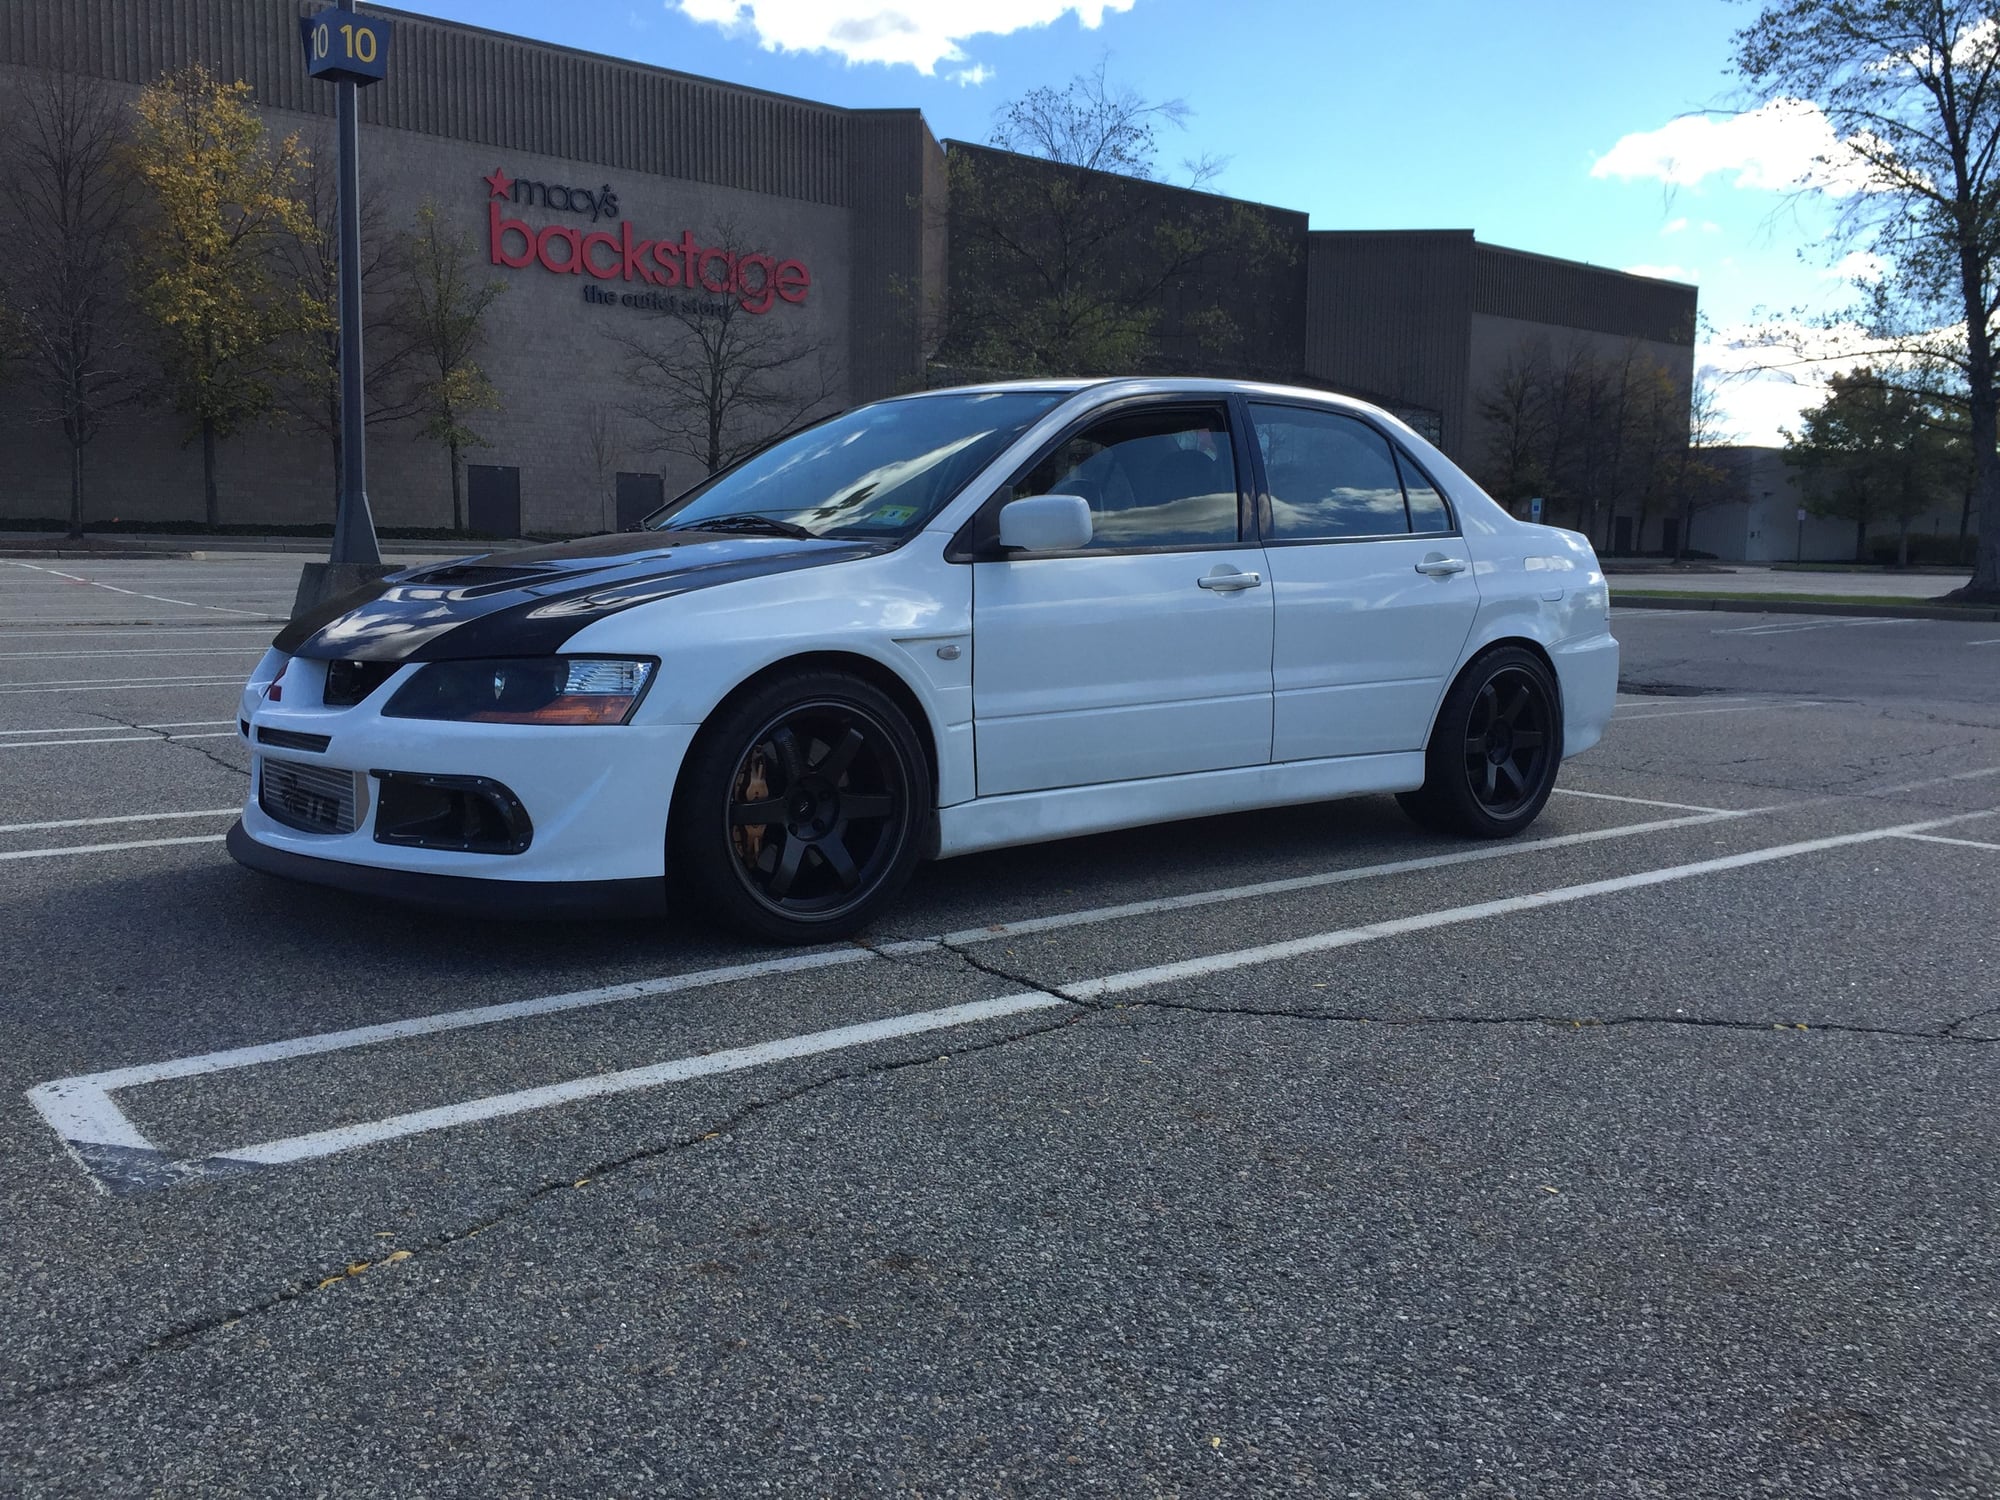 Wheels and Tires/Axles - 18 x 9.5 +22 Volk TE-37 RT's and 255/35/18 ADVAN Neova R tires - Used - 2004 to 2018 Mitsubishi Lancer Evolution - Belleville, NJ 07109, United States